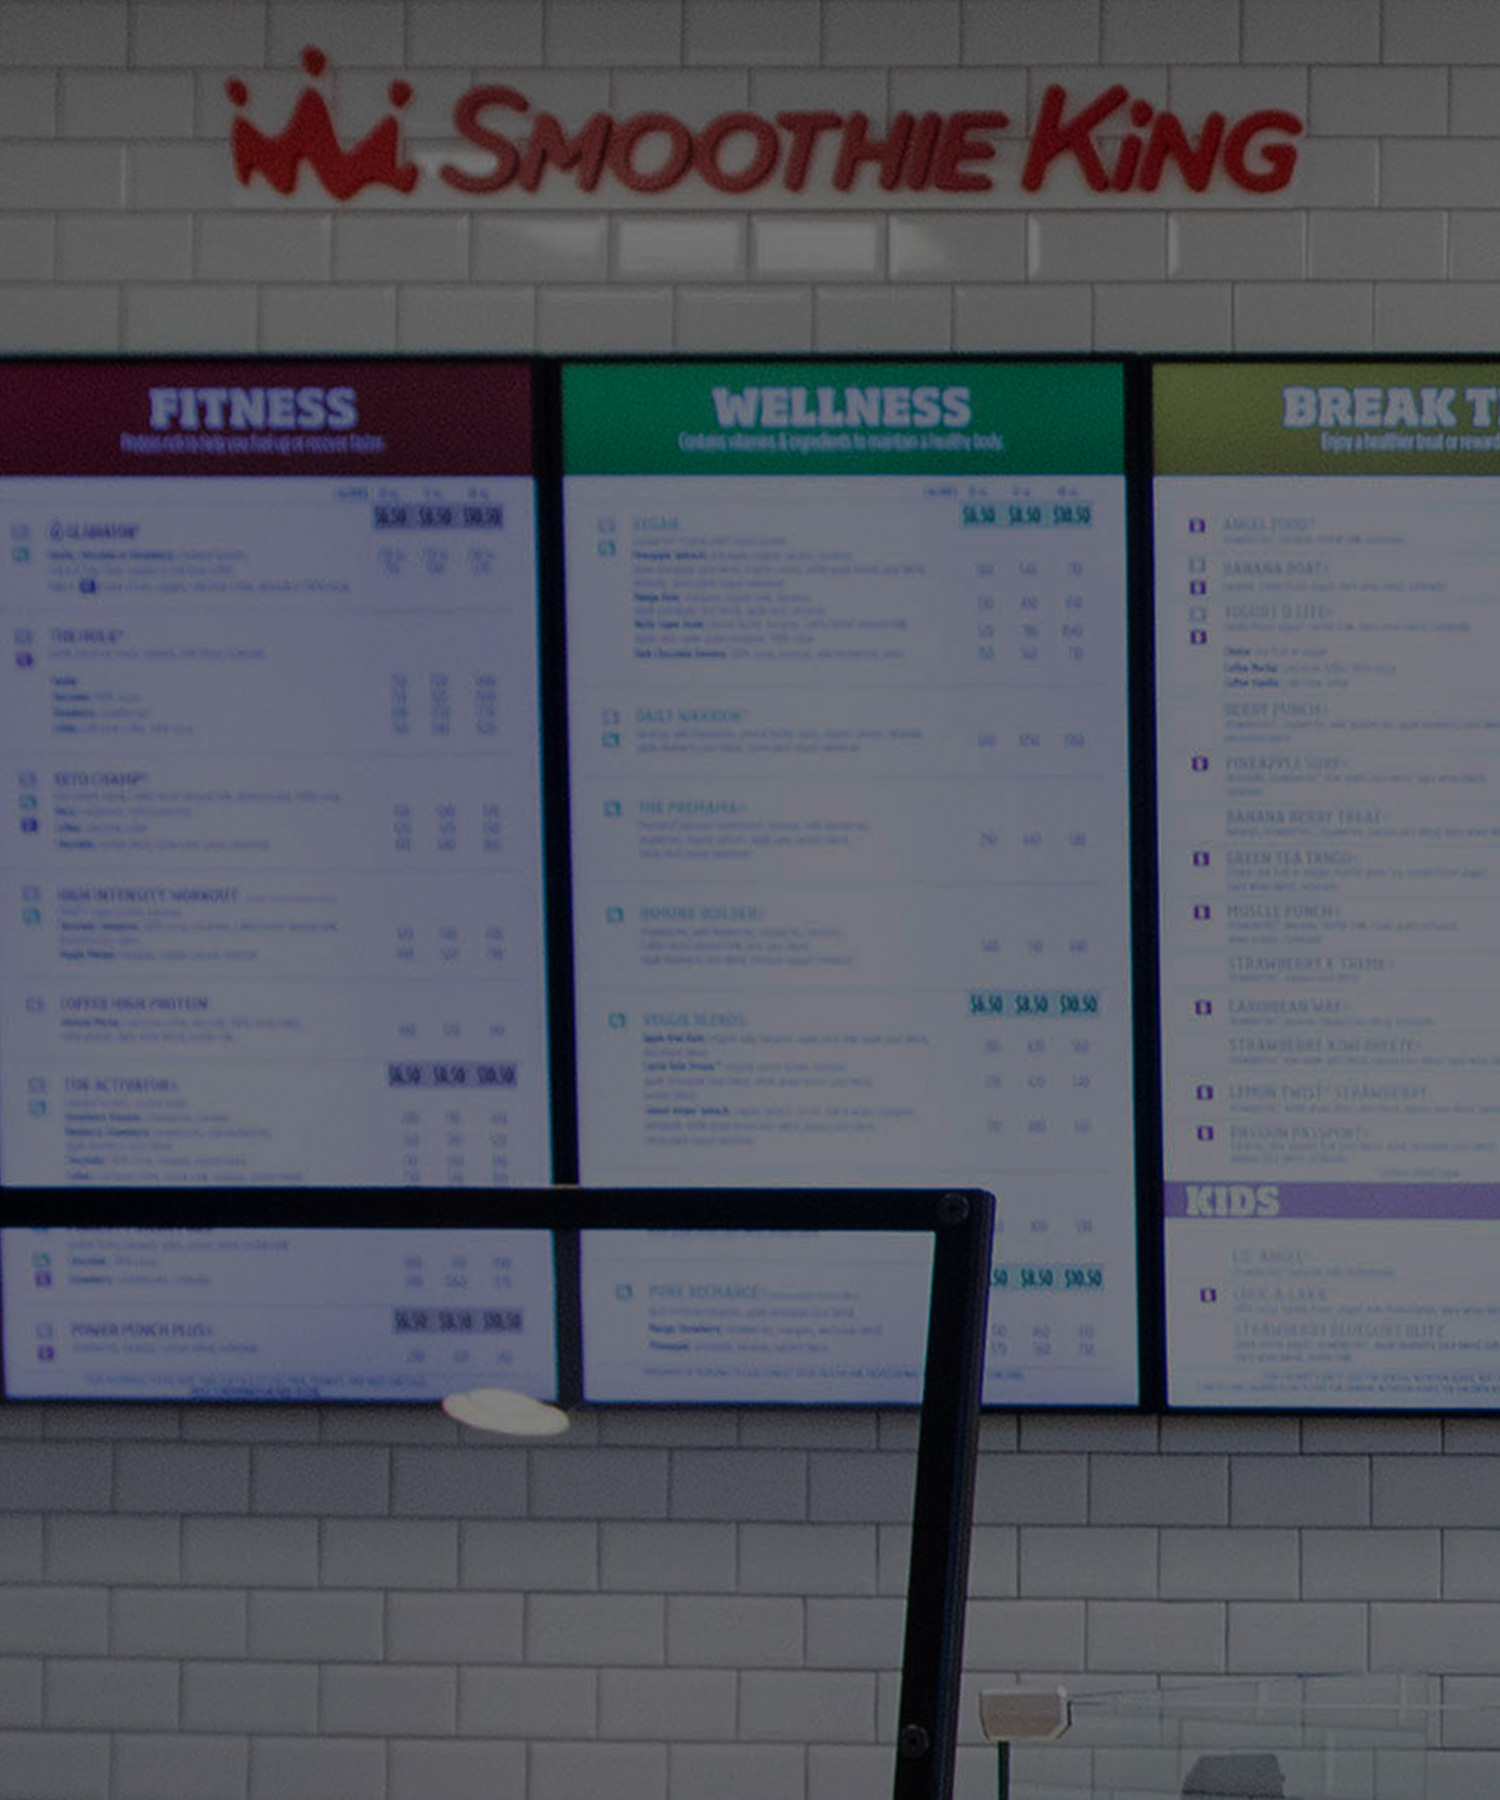 Smoothie King transforms the customer experience with digital menu boards